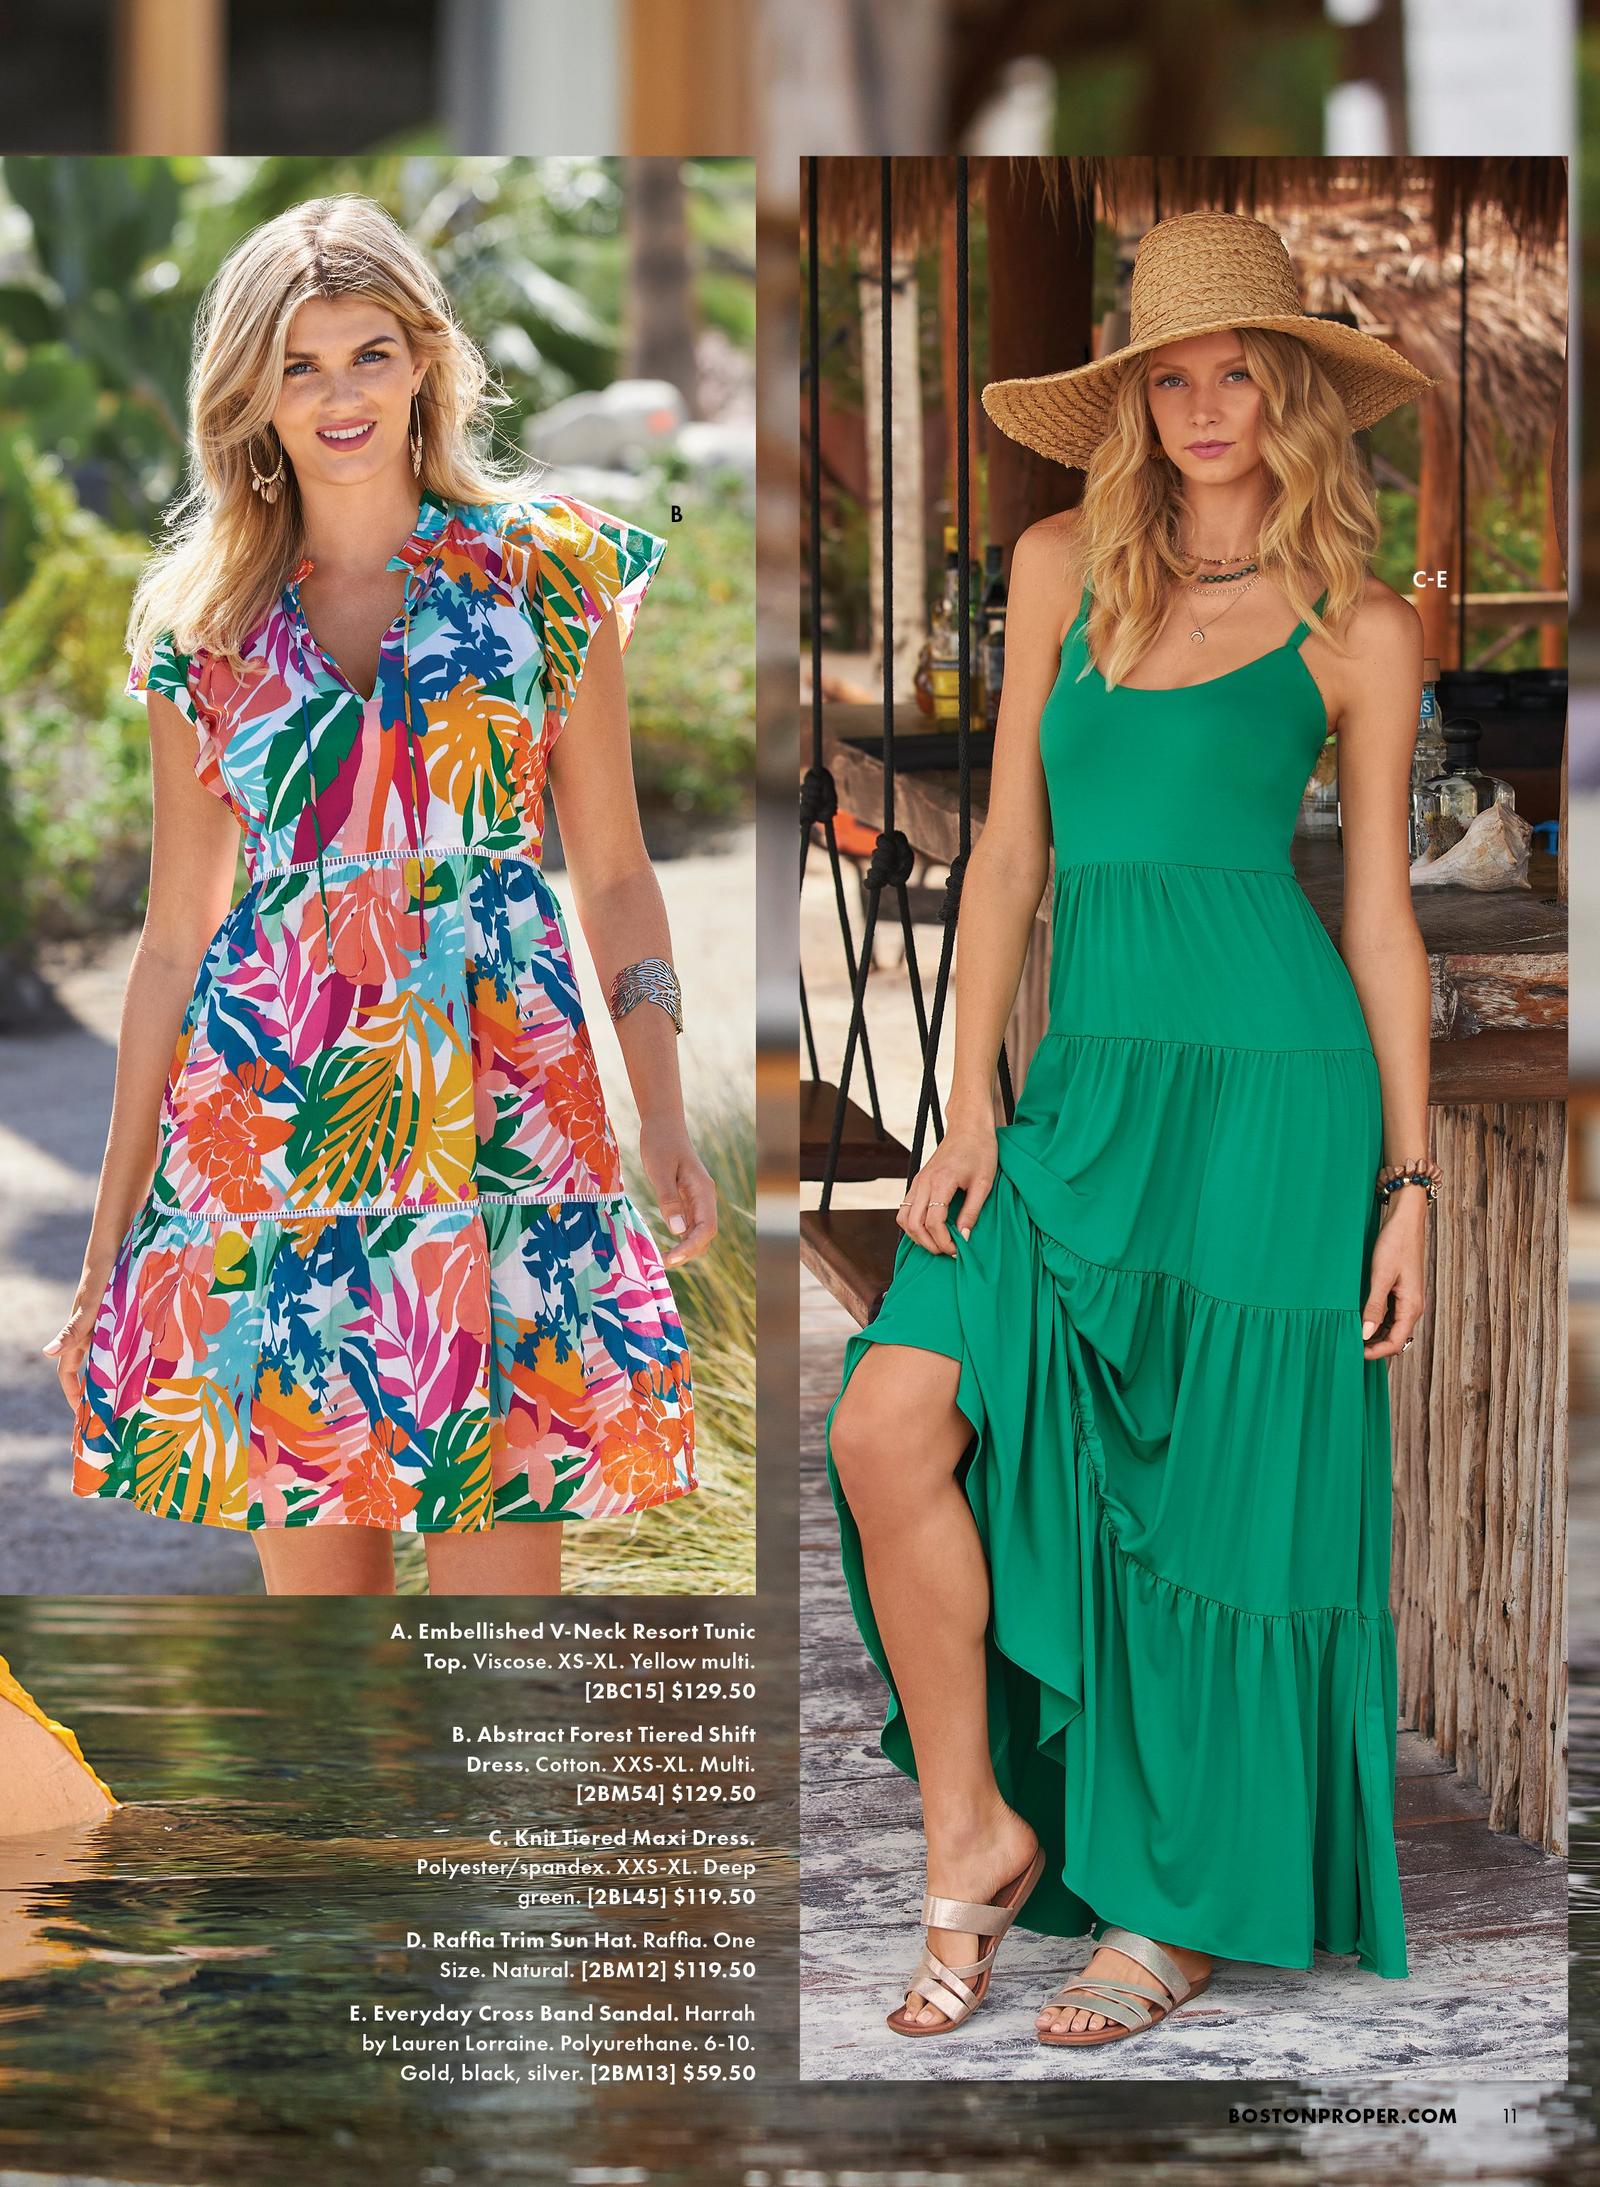 One model wears the Abstract Forest Tiered Shift Dress in a rainbow floral print. Another model wears the Knit Tiered Maxi Dress in a deep green, the Raffia Trim Sun Hat in a natural woven tan and the Everyday Cross Band Sandal featuring silver straps and a brown bottom.